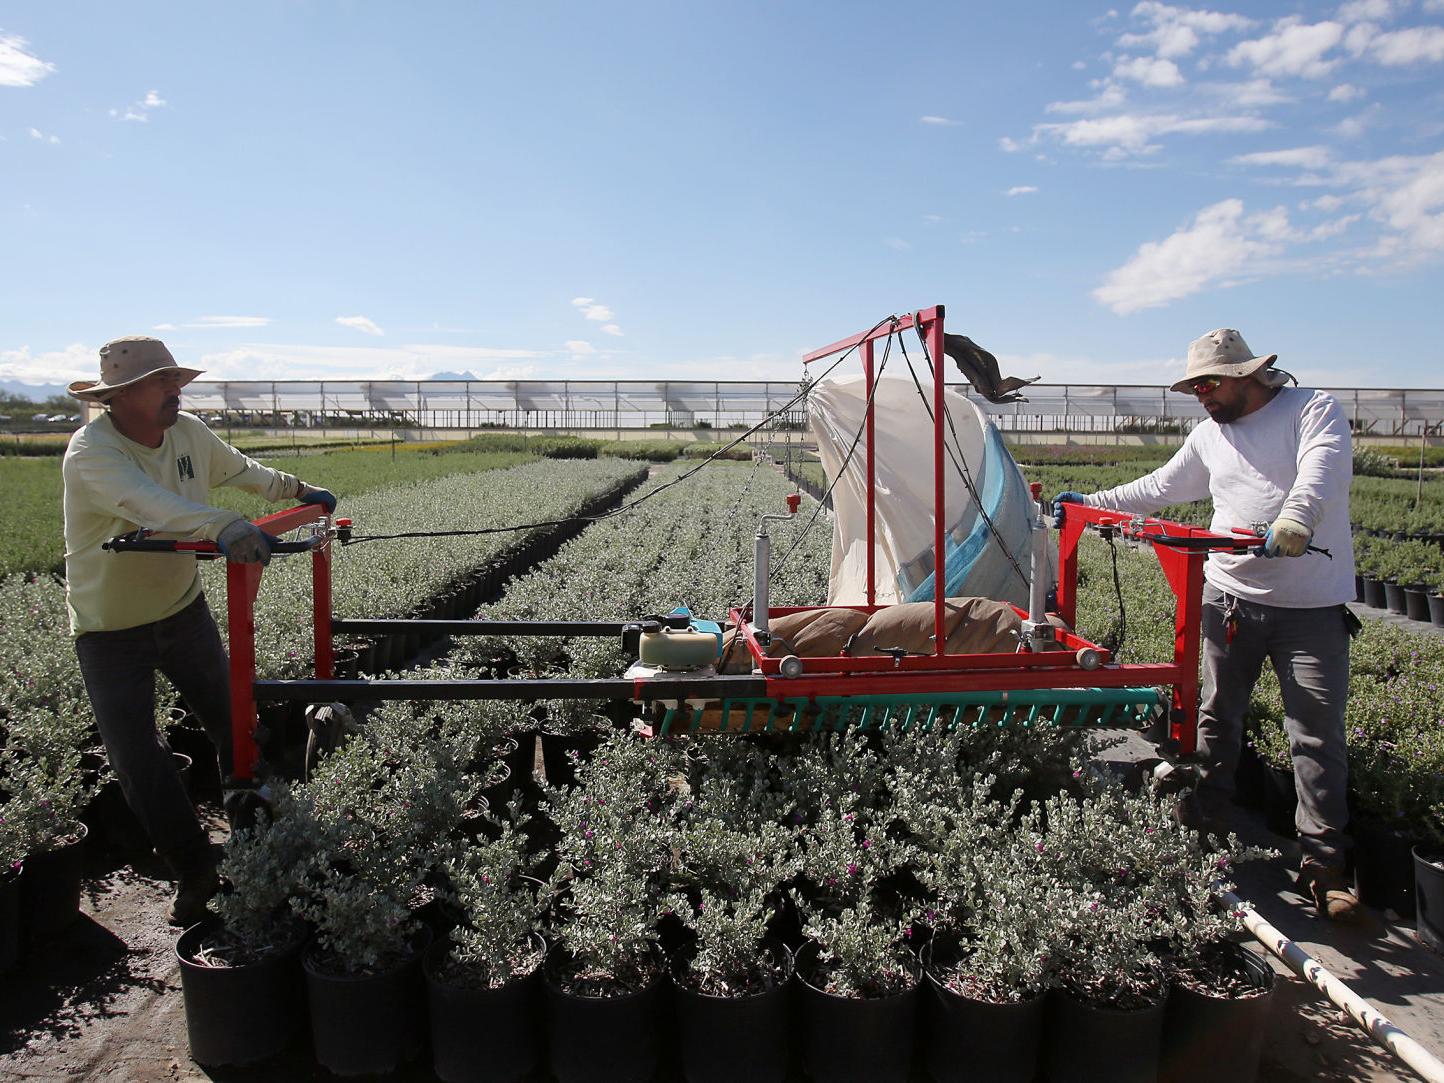 Independent Civano Nursery Growing With National Grower Monrovia Collectibles Tucsoncom